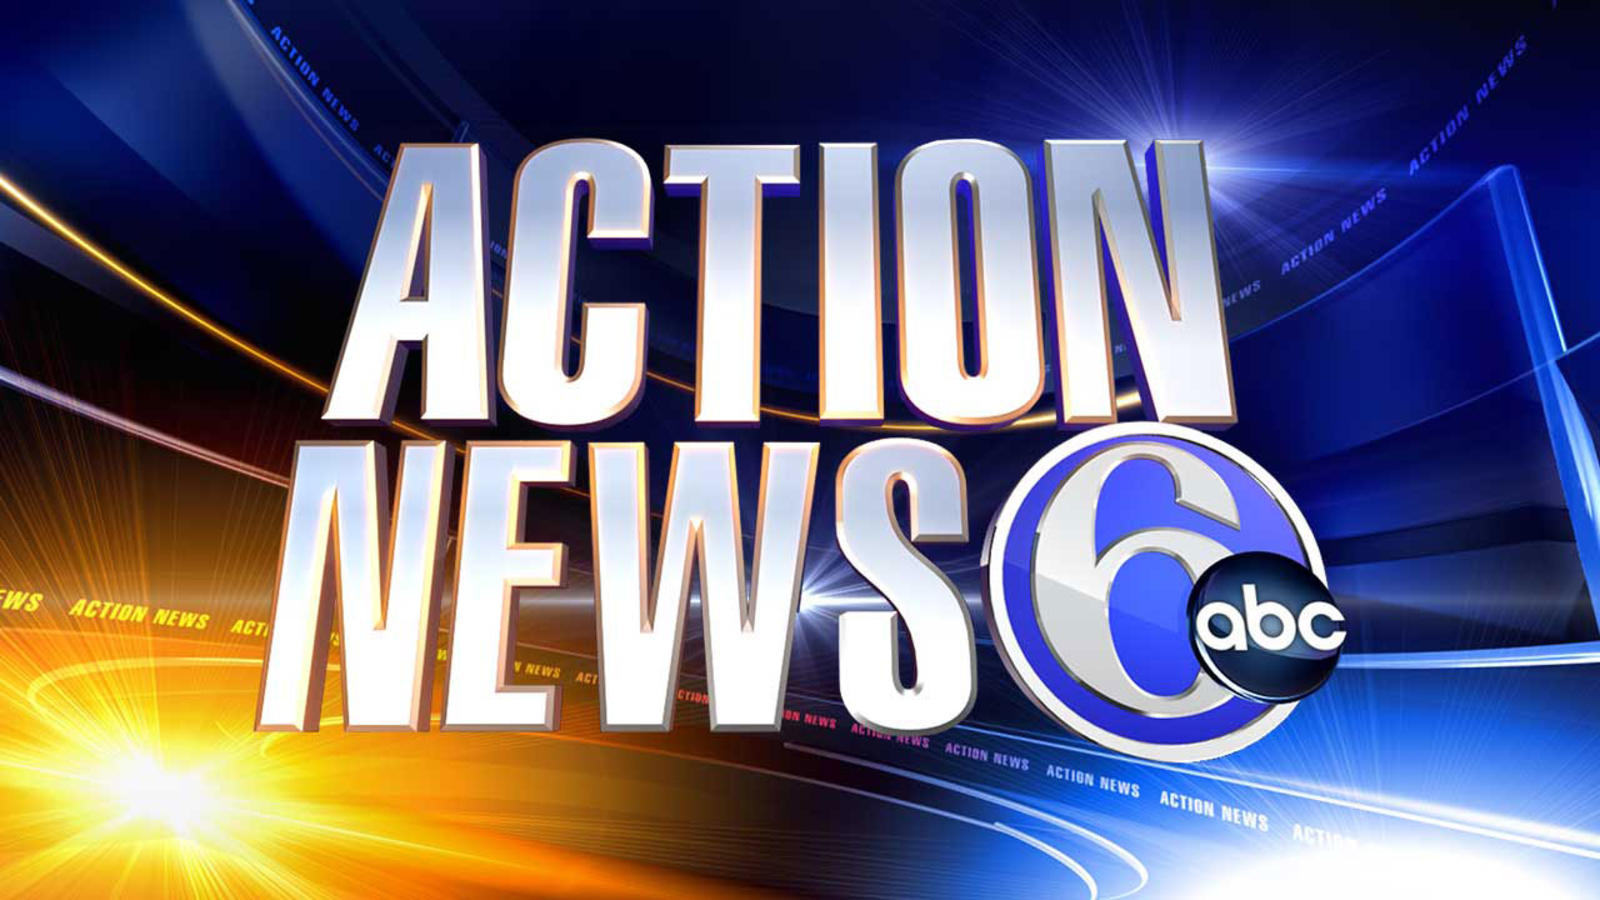 Action News Now: Your Gateway to Northern California’s Latest Updates